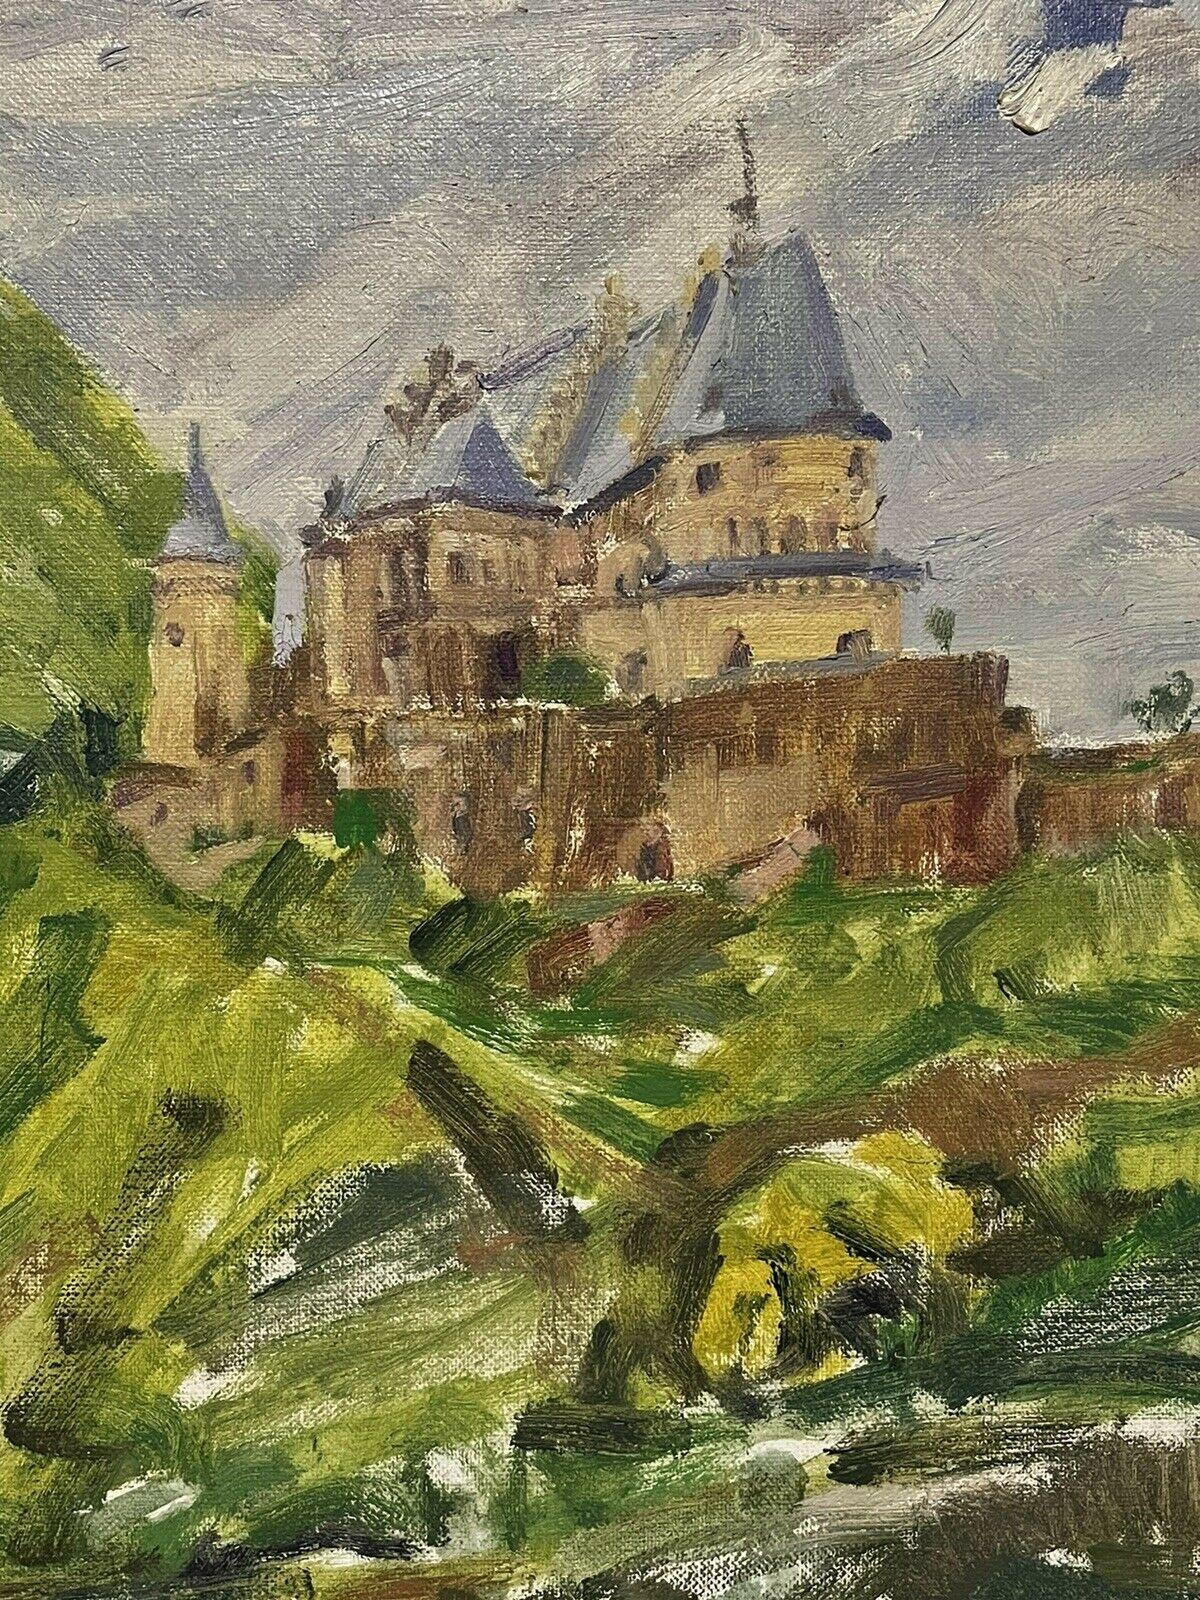 Artist/ School/ Date:
Douglas Stuart Allen (American/ French 1923-2021)
American born artist from Chicago, retiring to France during his latter years to become a full time painter.

Title: Chateau On The Hill

Medium: oil painting on canvas,